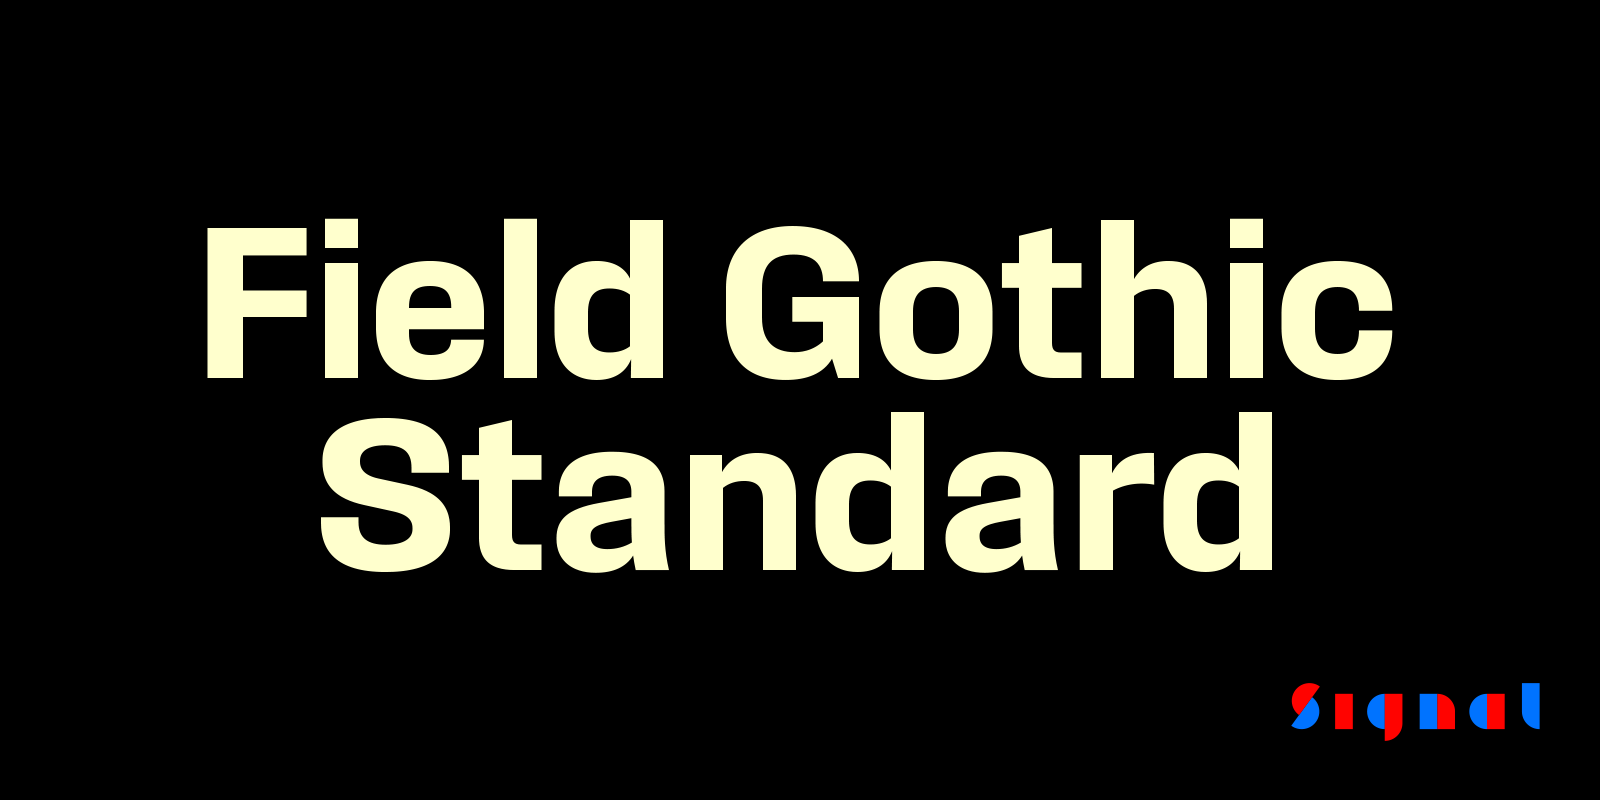 Card displaying Field Gothic Standard typeface in various styles